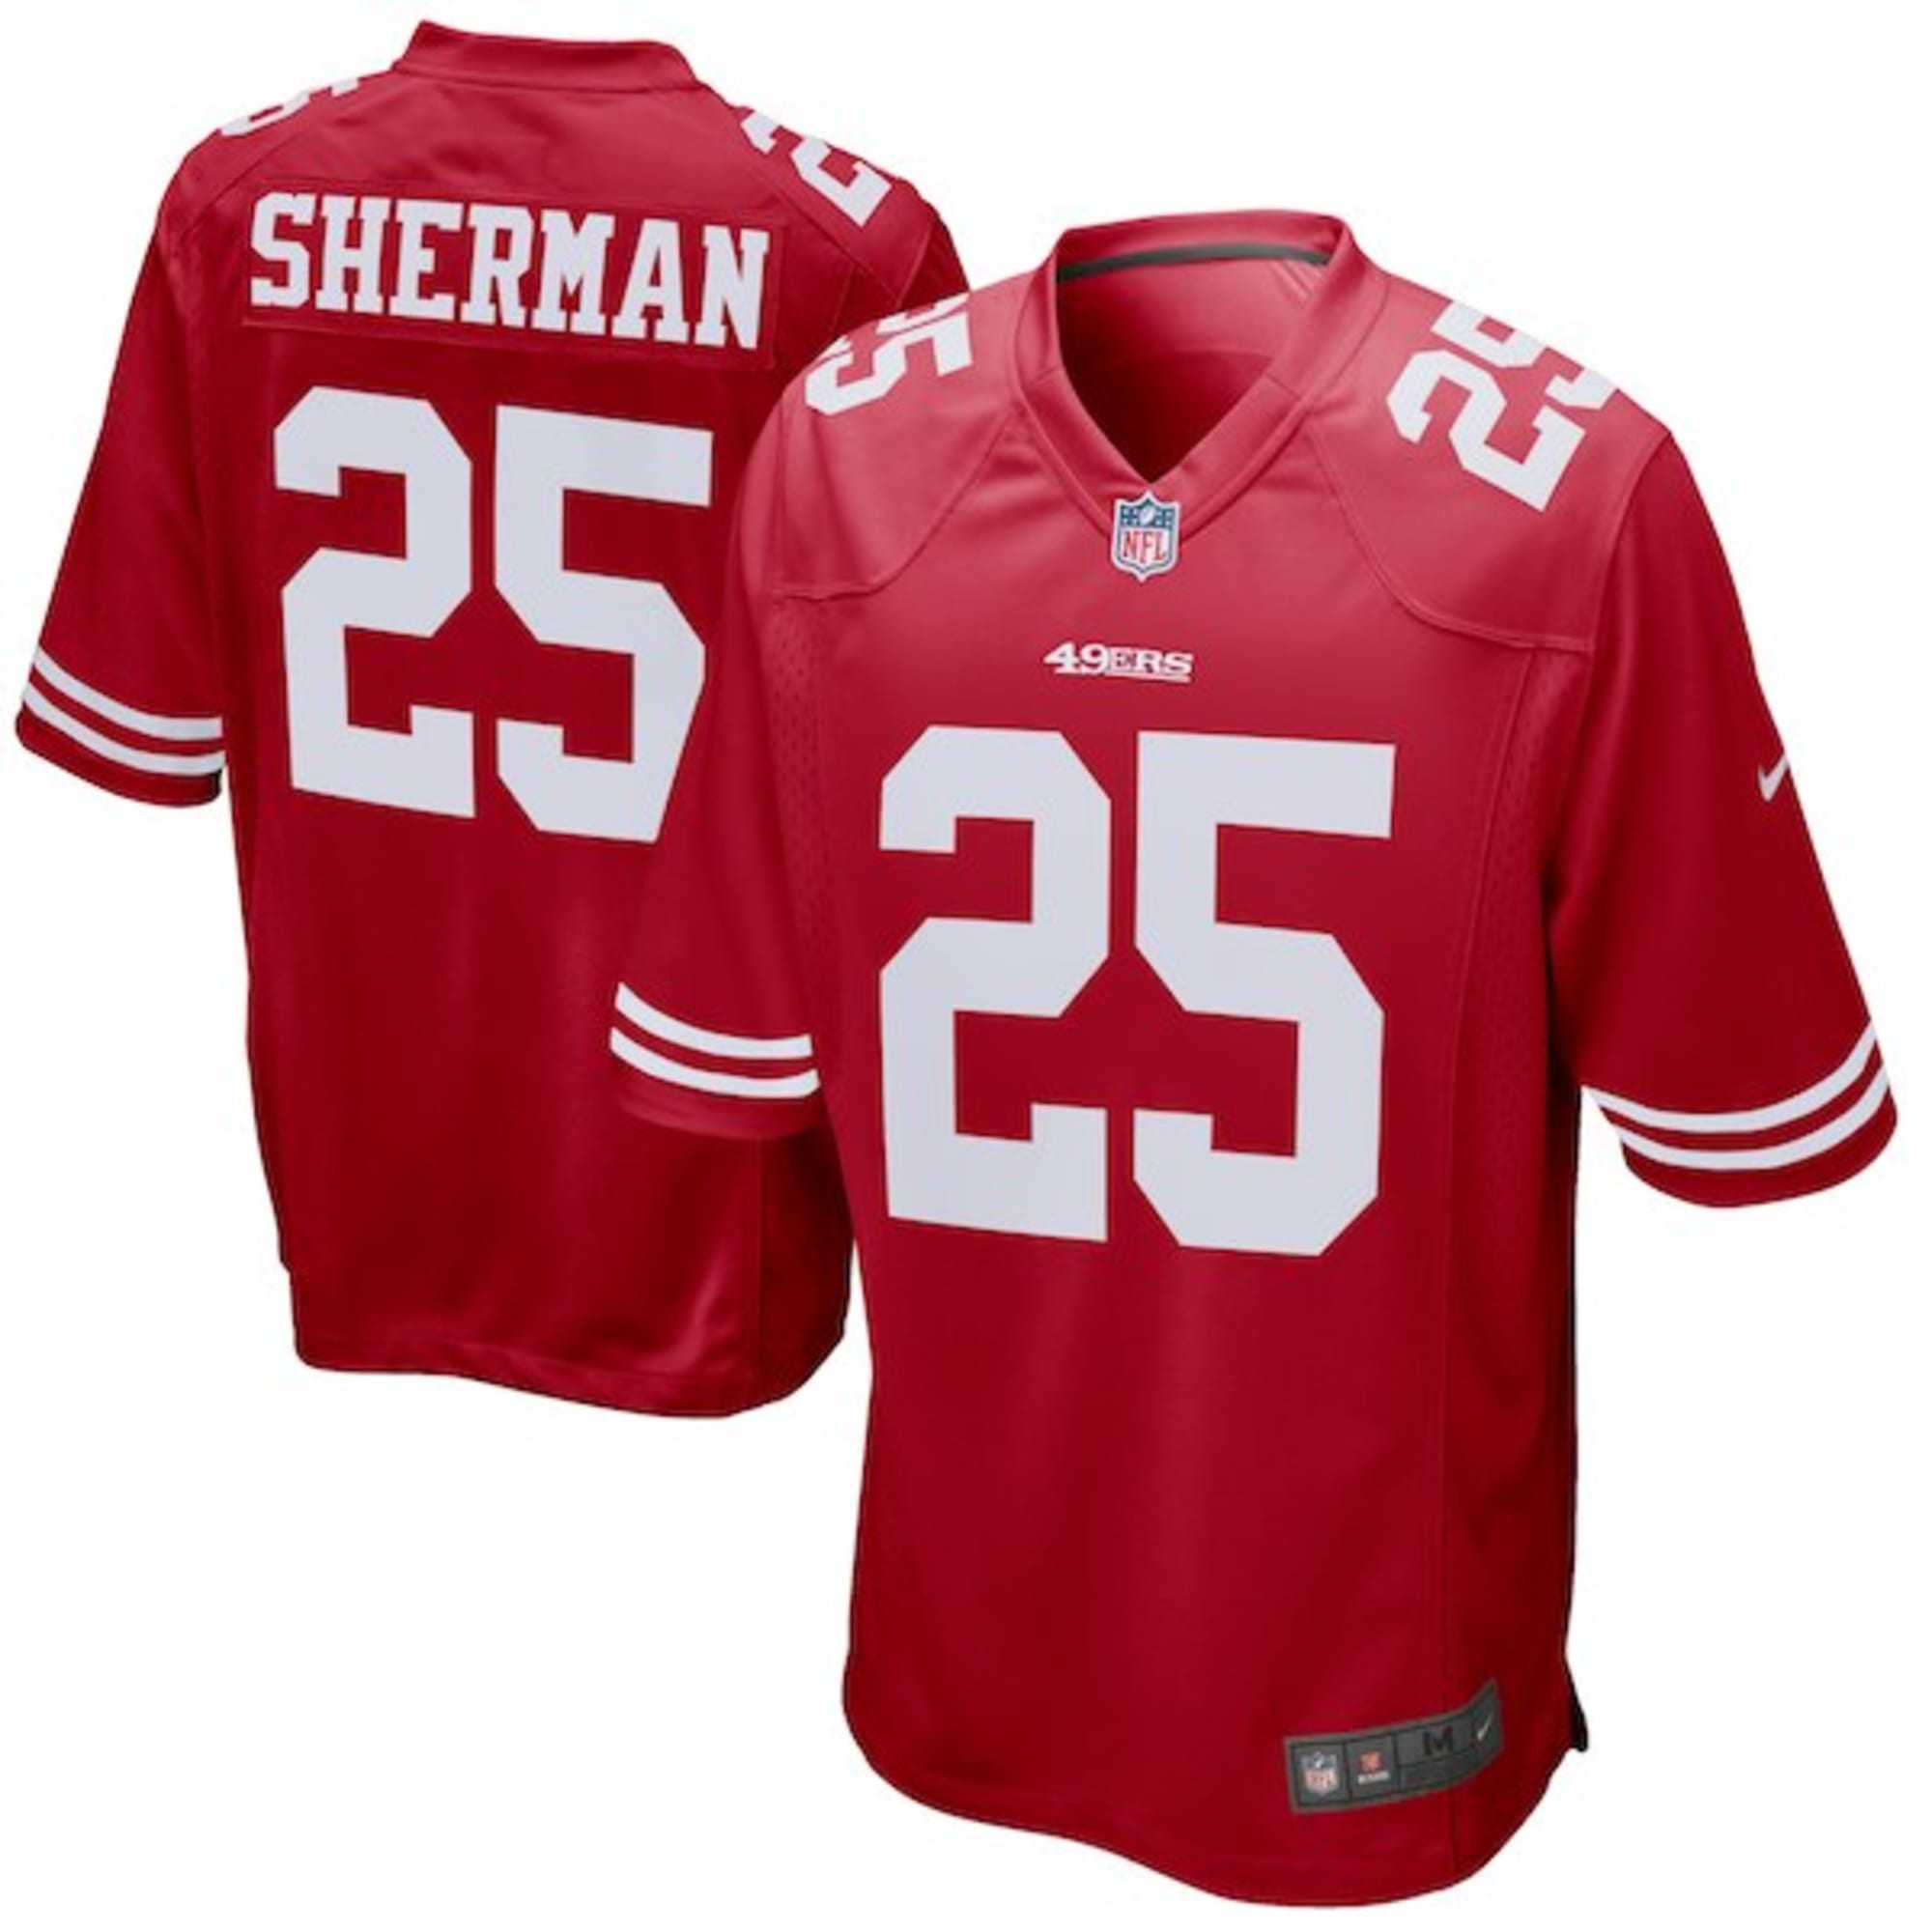 49ers jersey 19